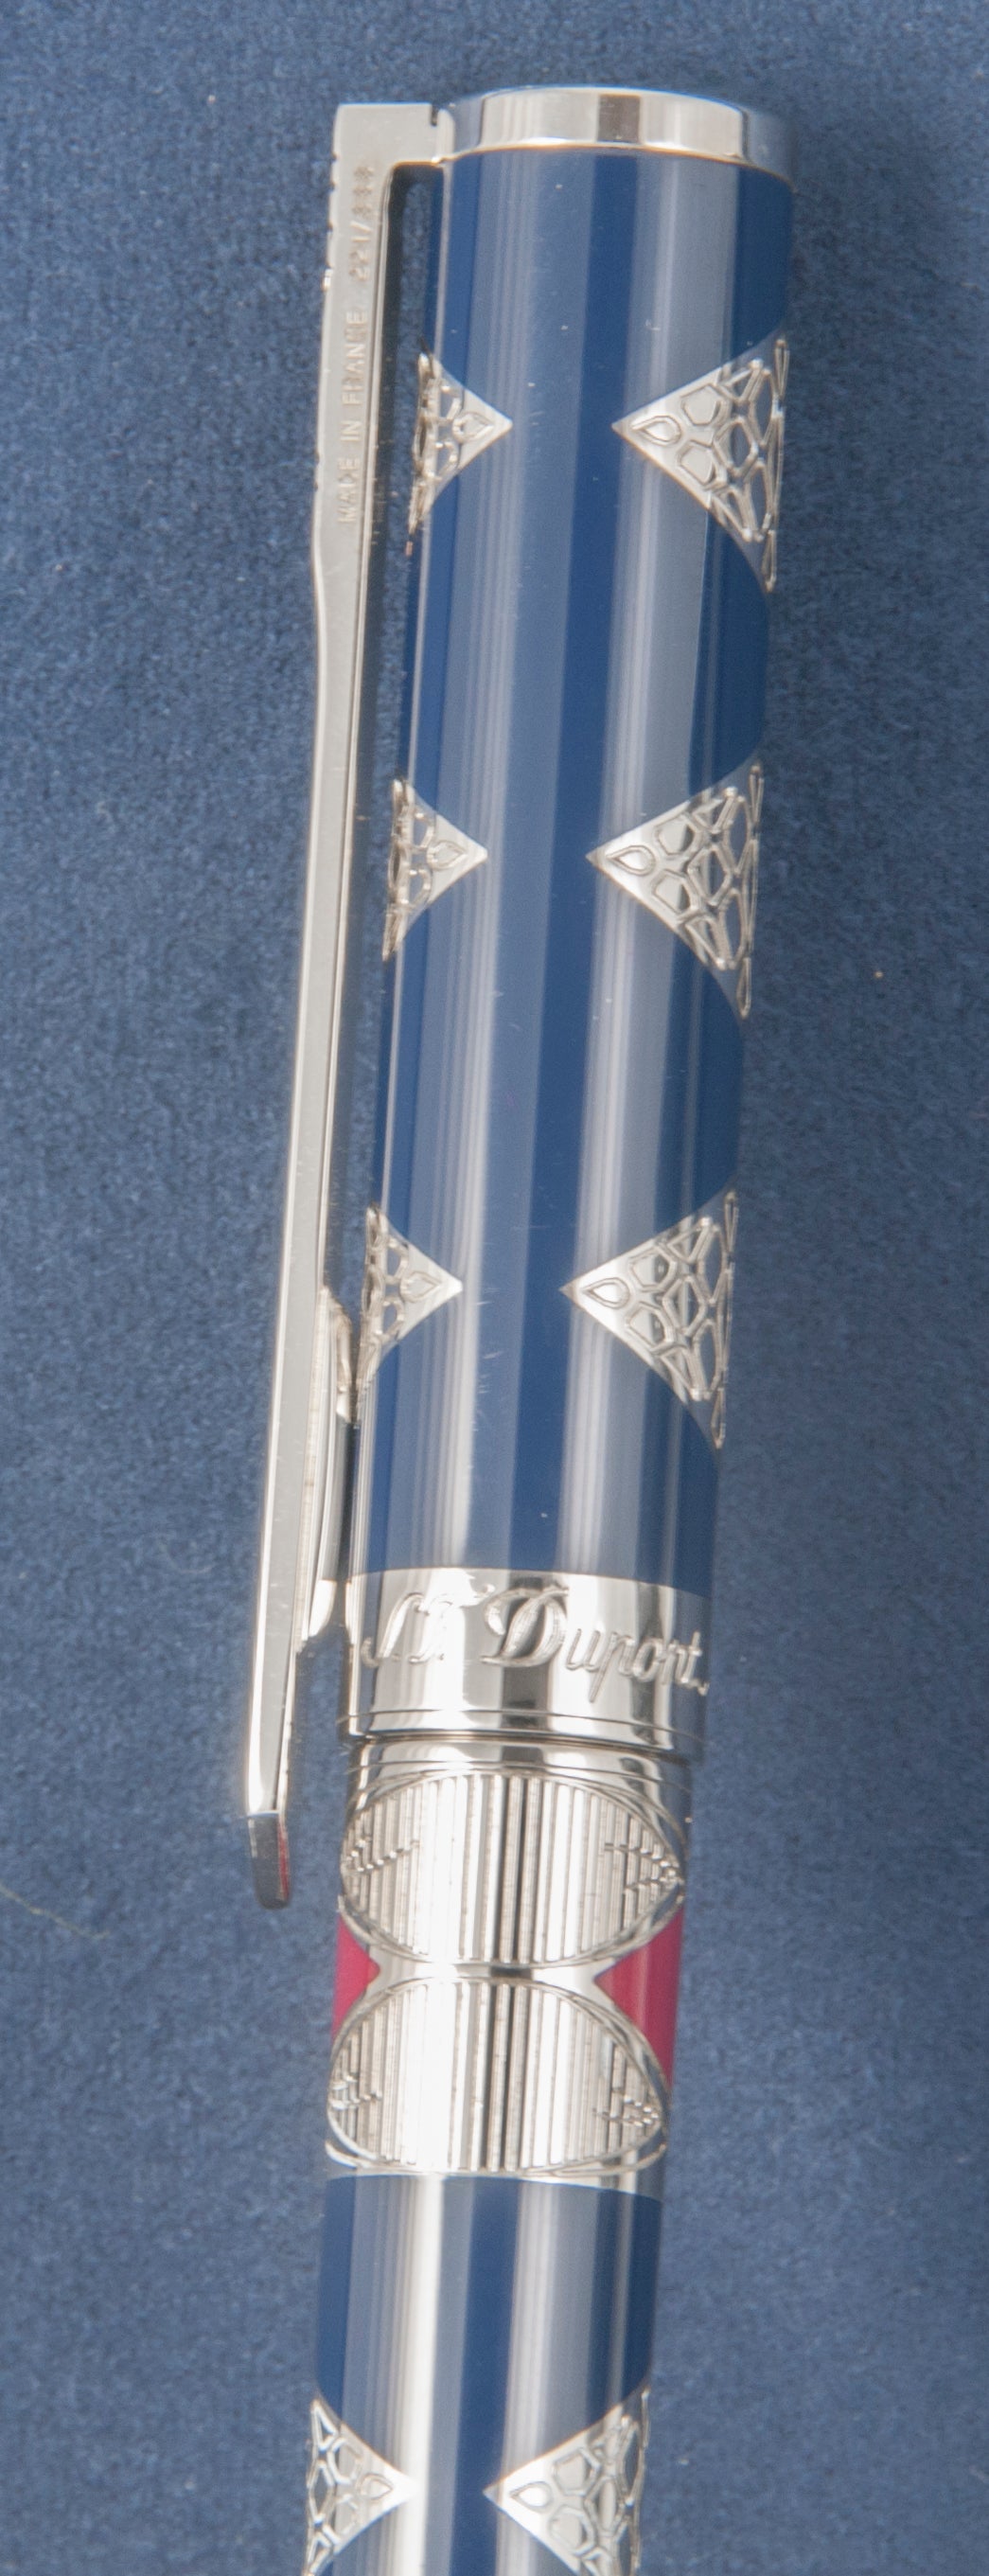 S.T. Dupont Samourai Large Neo-Classique Rollerball Pen Limited Edition